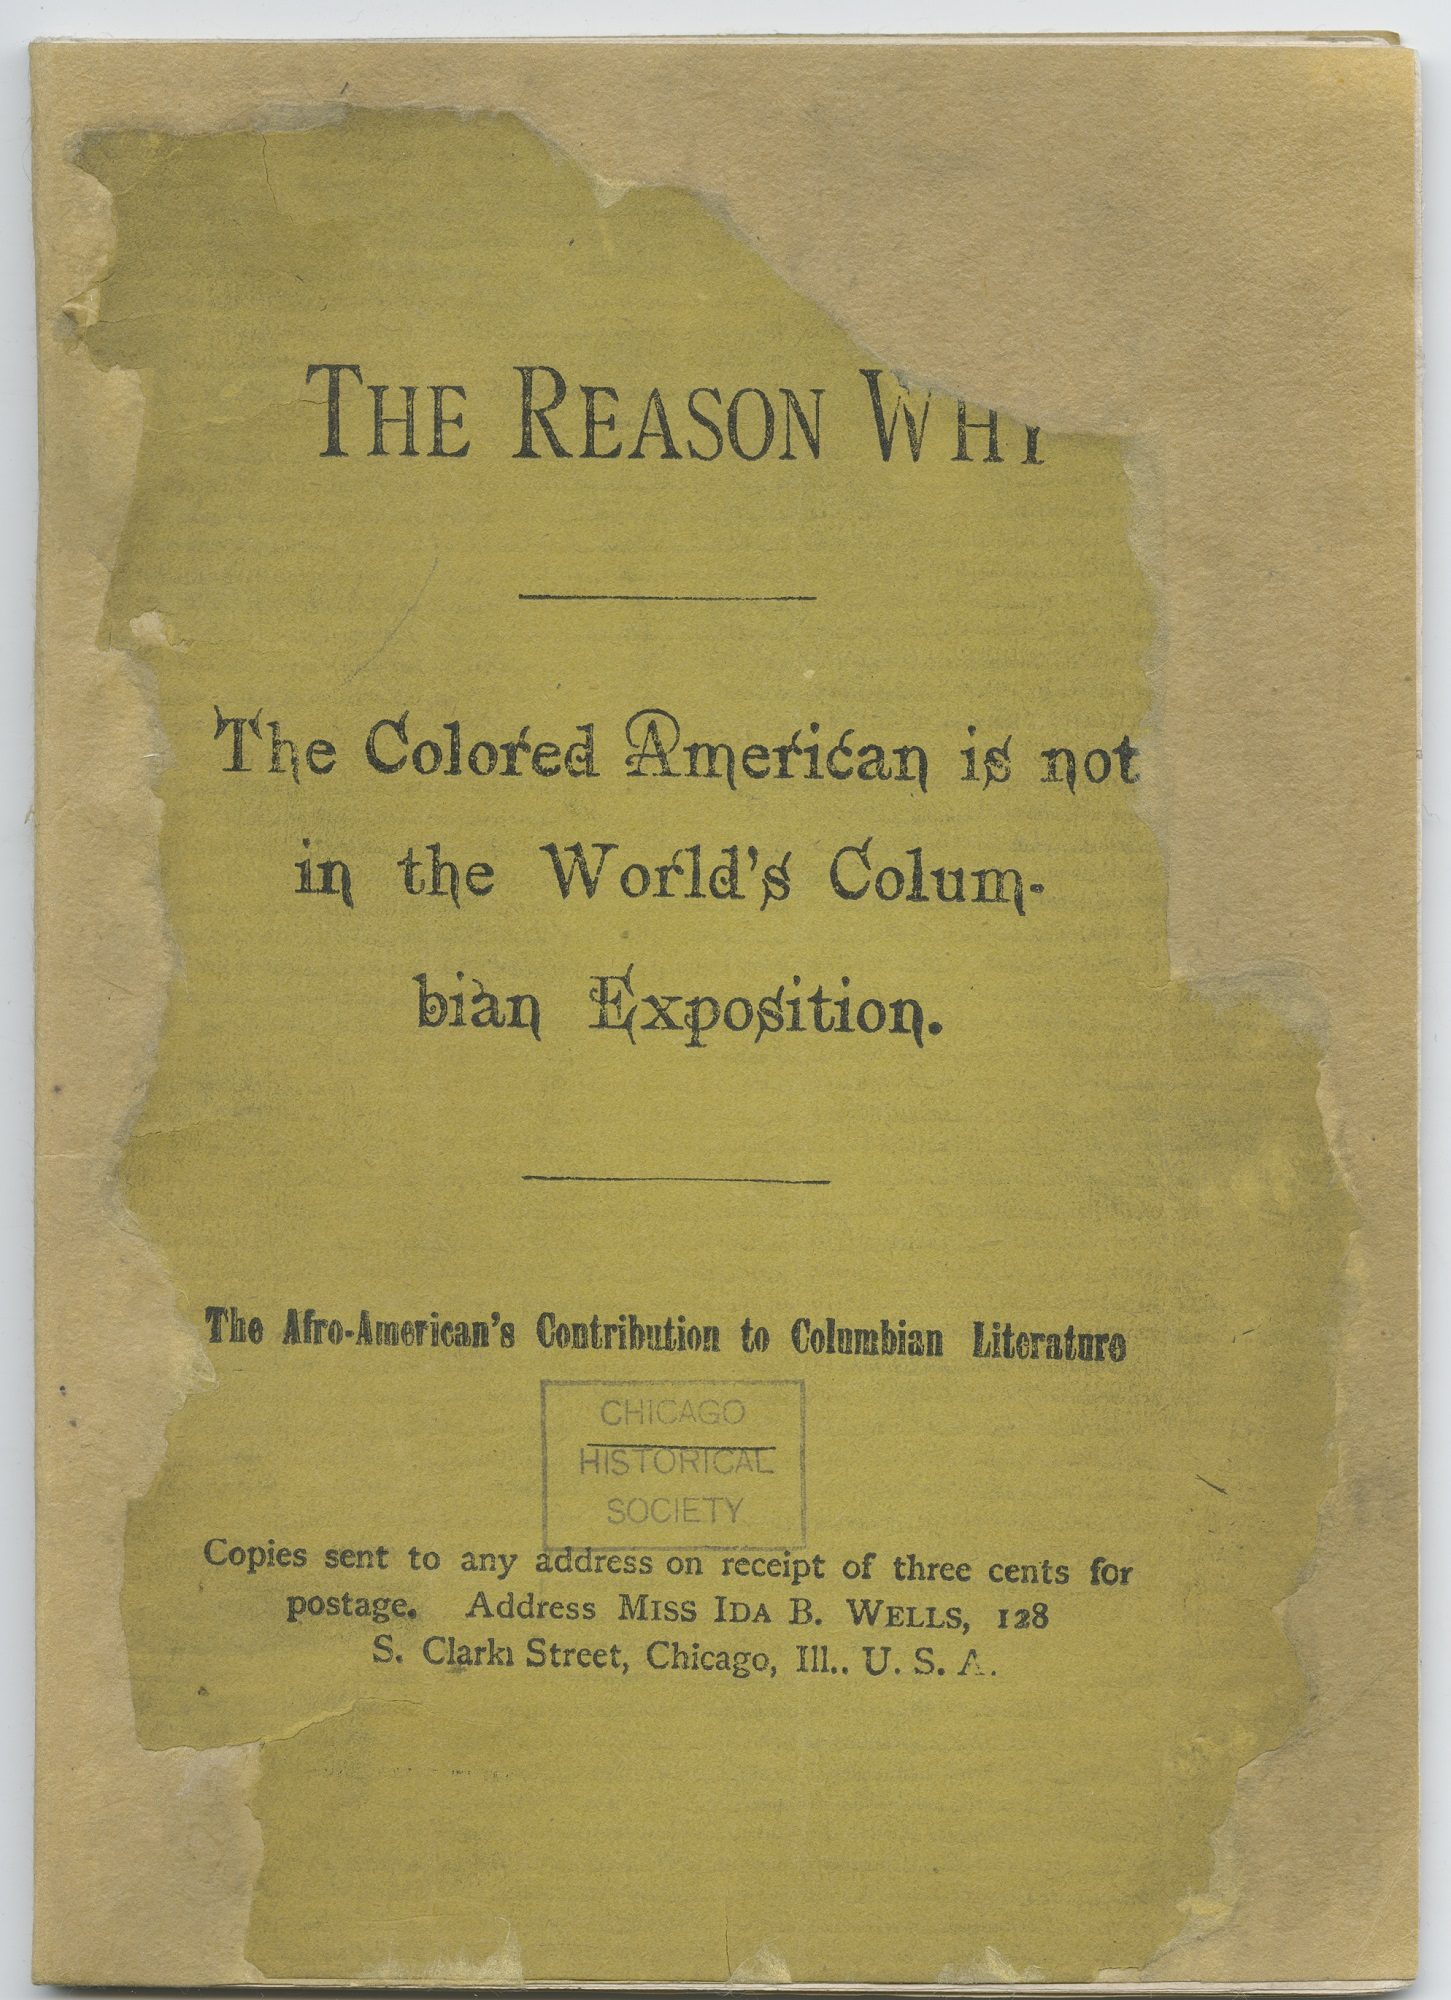 Cover of the booklet The reason why the colored American is not in the World's Columbian Exposition : the Afro-American's contribution to Columbian literature, by Ida B. Wells.